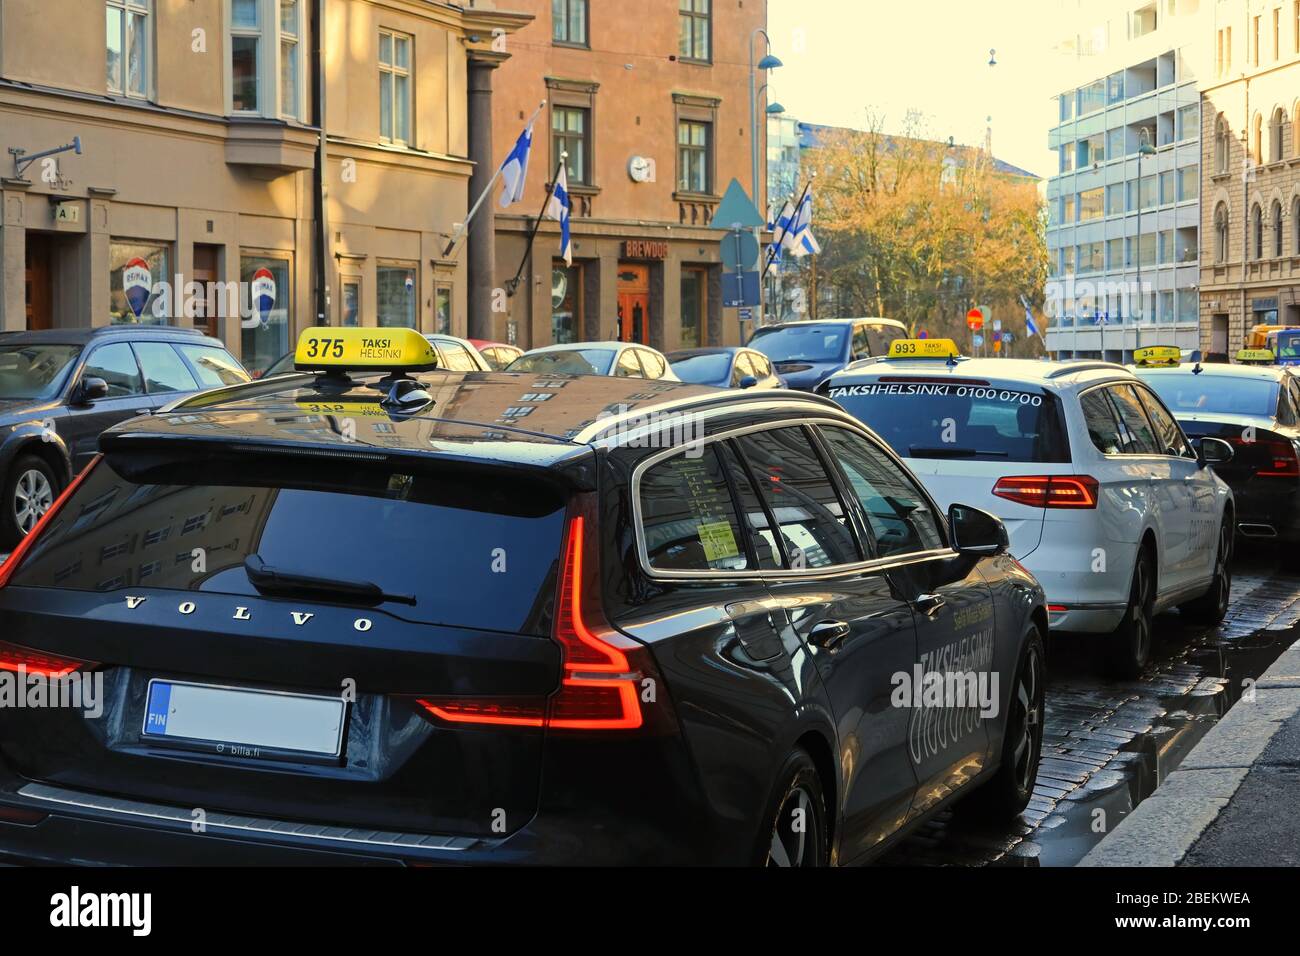 Taxi cab line up or taxi queue by narrow street on a day of spring. Helsinki, Finland. March 19, 2020. Stock Photo